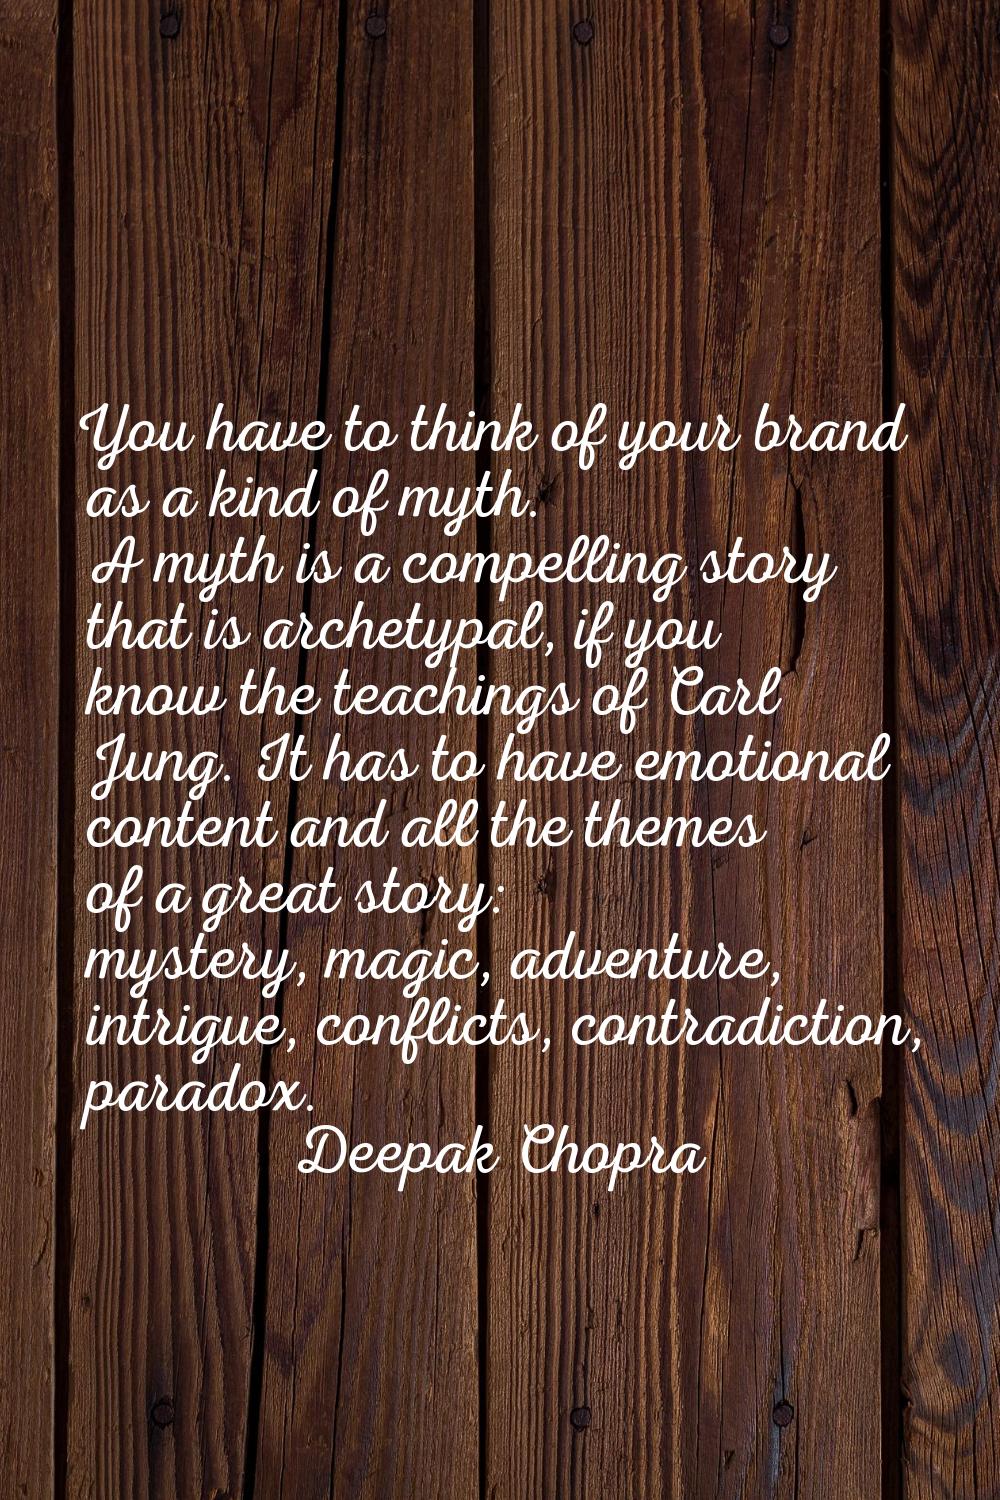 You have to think of your brand as a kind of myth. A myth is a compelling story that is archetypal,